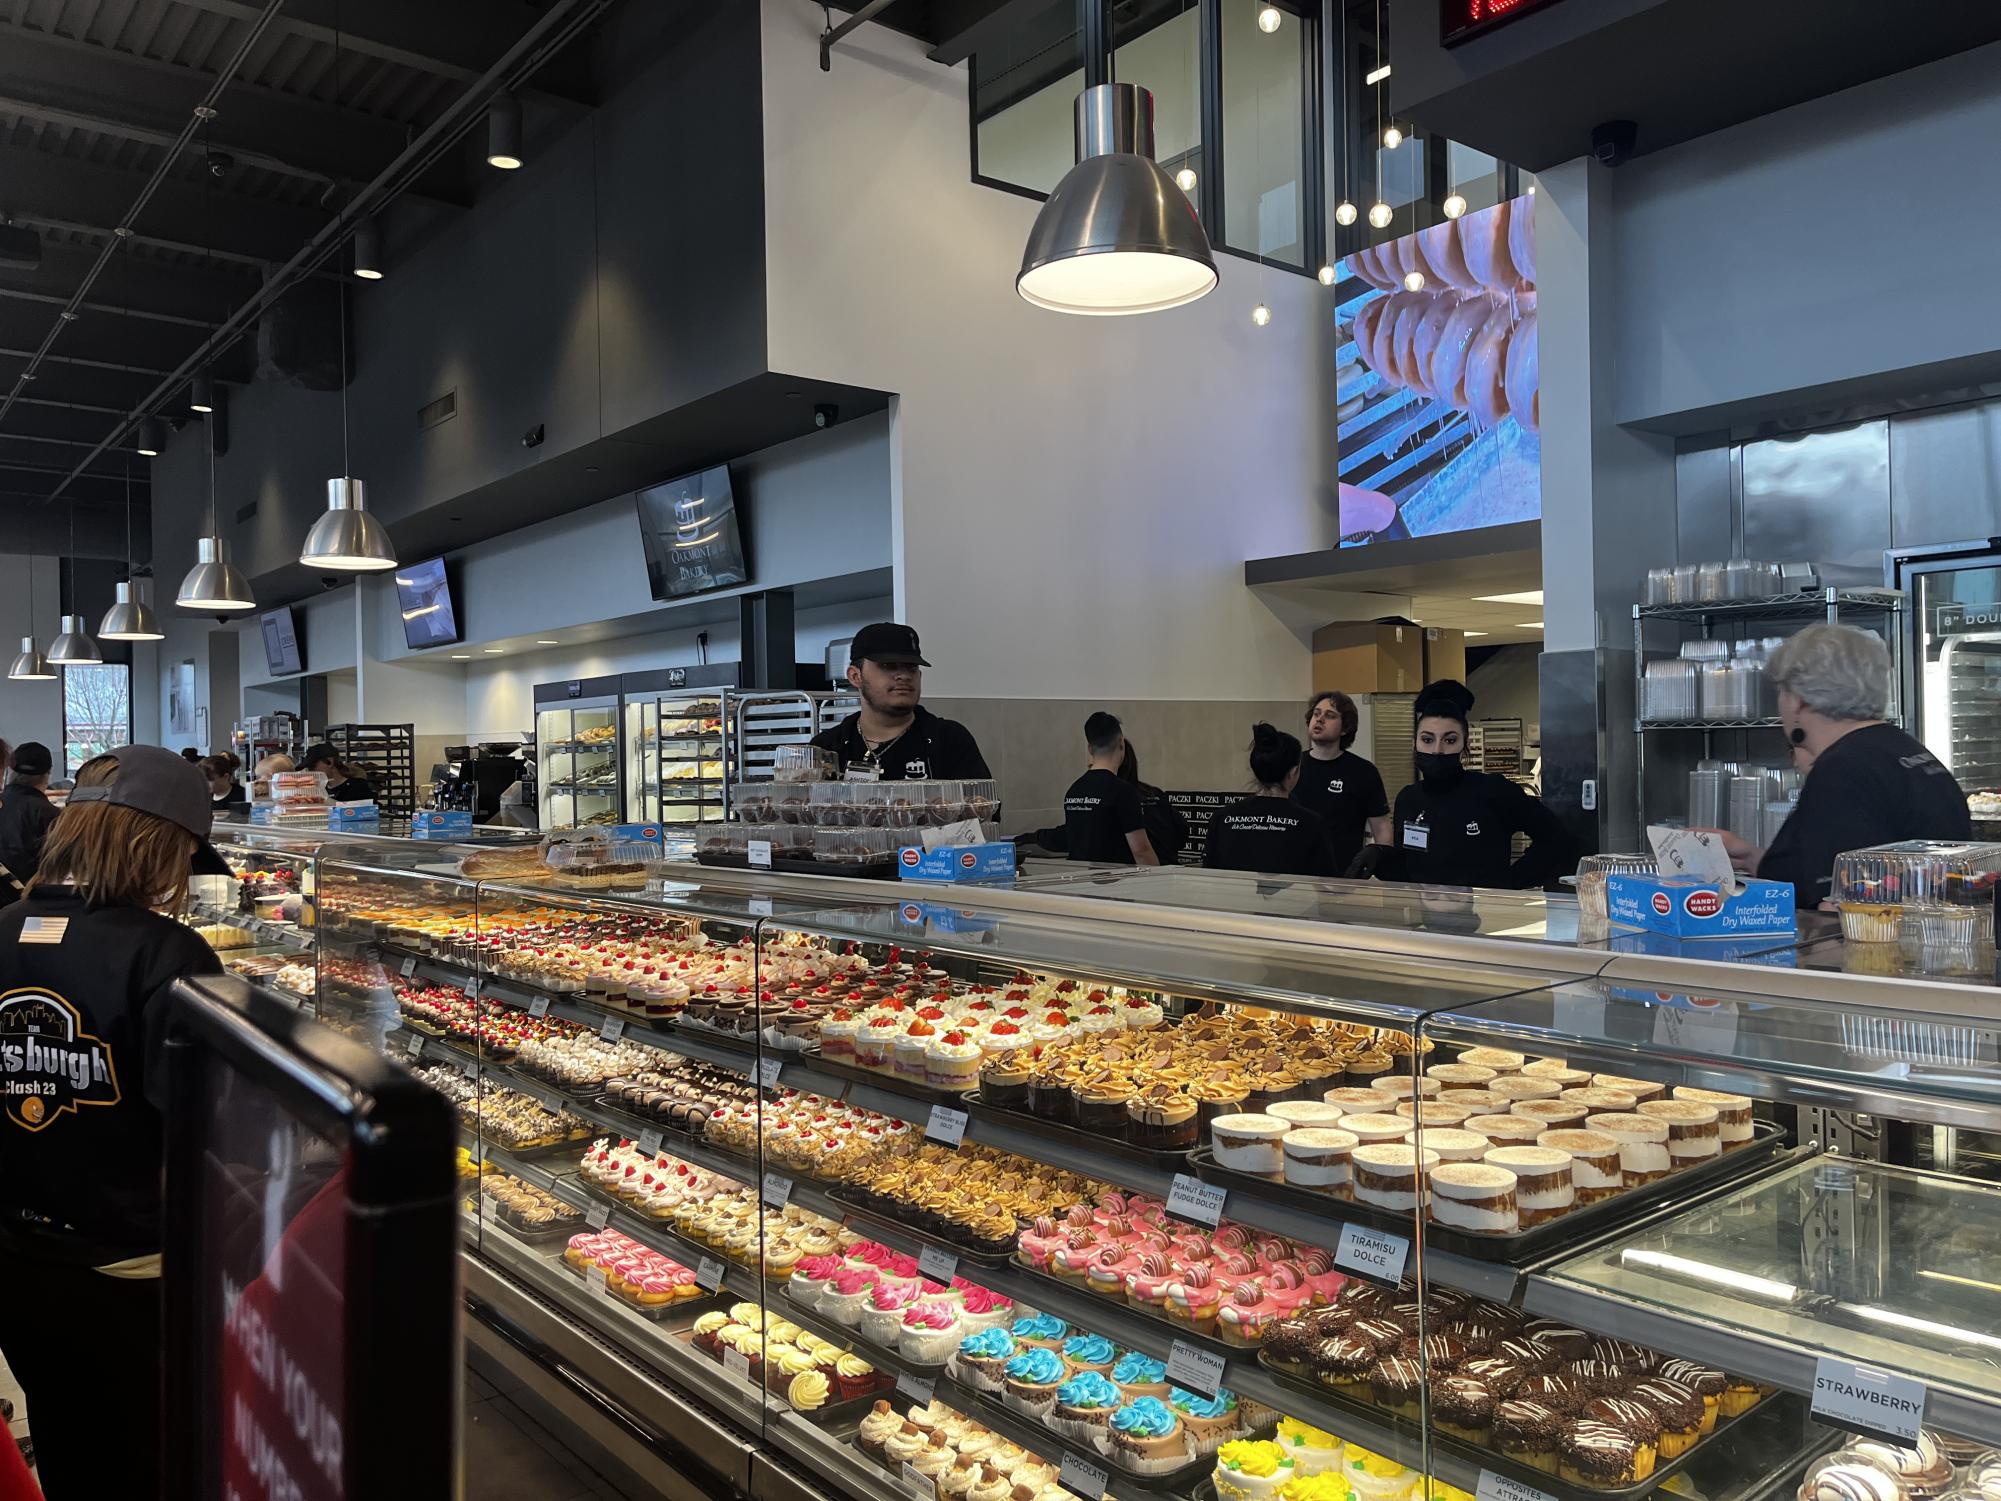 Employees take customers by number and help pick out your baked goods. They usually have no down time due to how busy and popular the bakery is. 